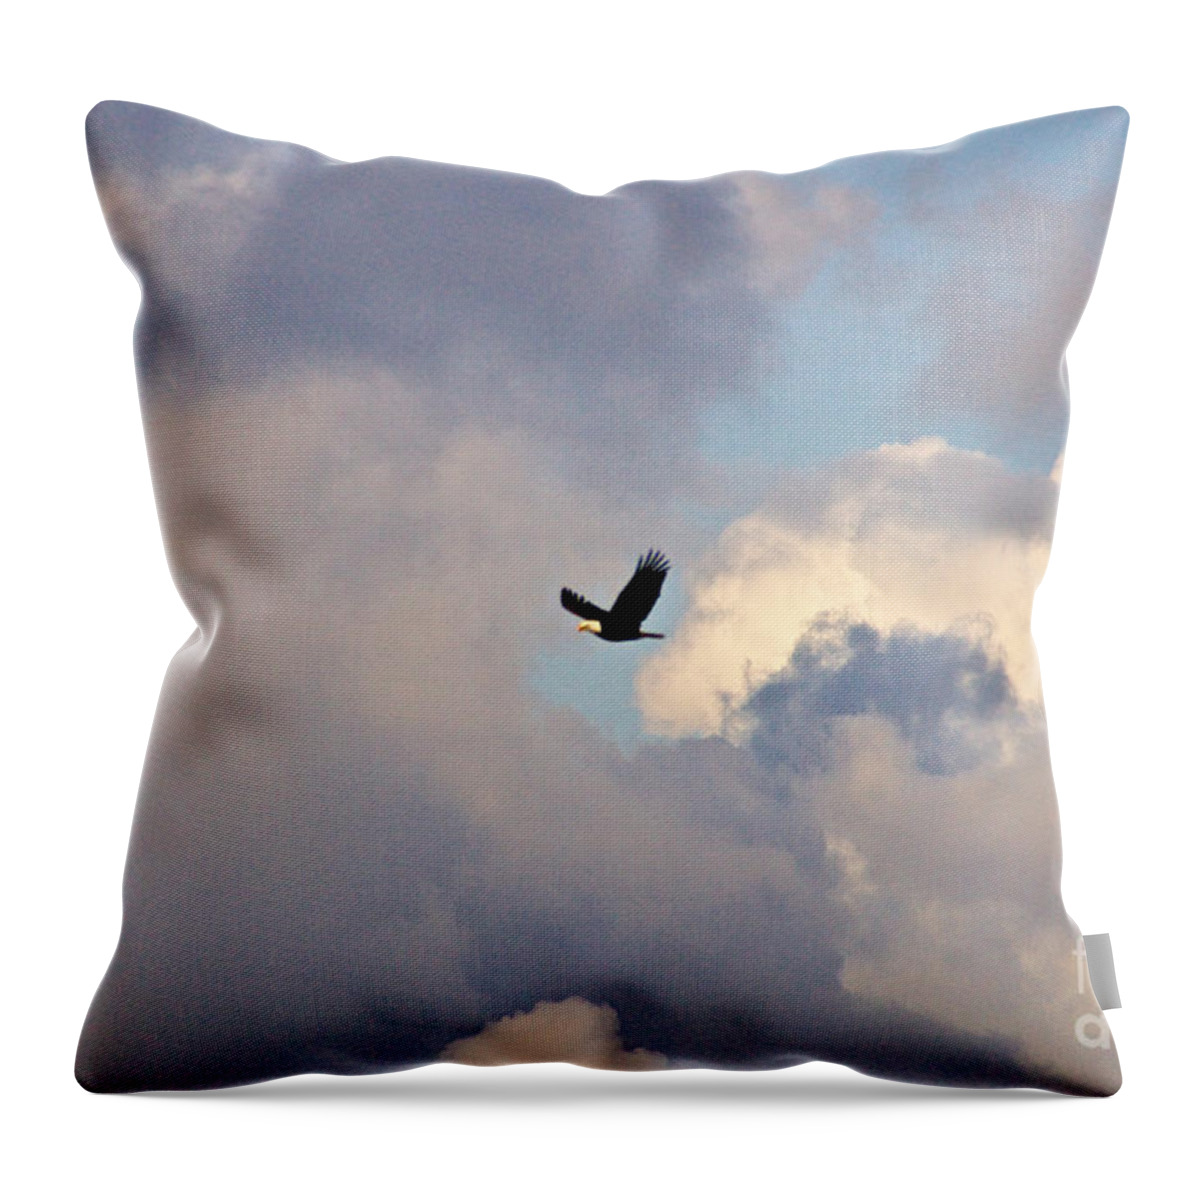 Photography Throw Pillow featuring the photograph Through Stormy Skies by Sean Griffin